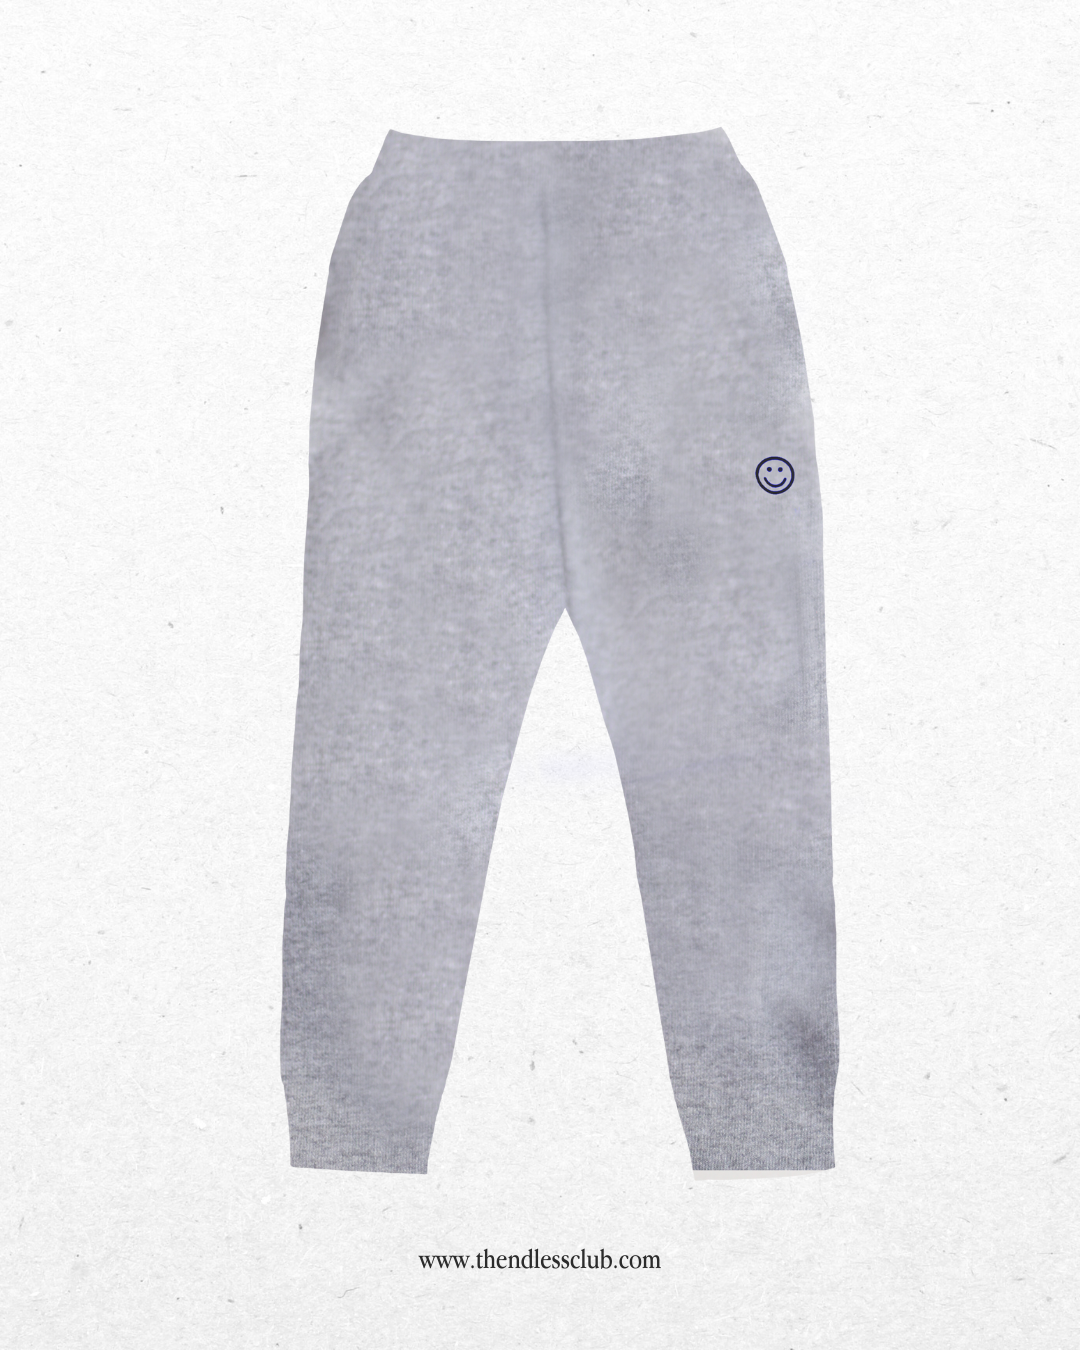 The Olympic Gray Pants